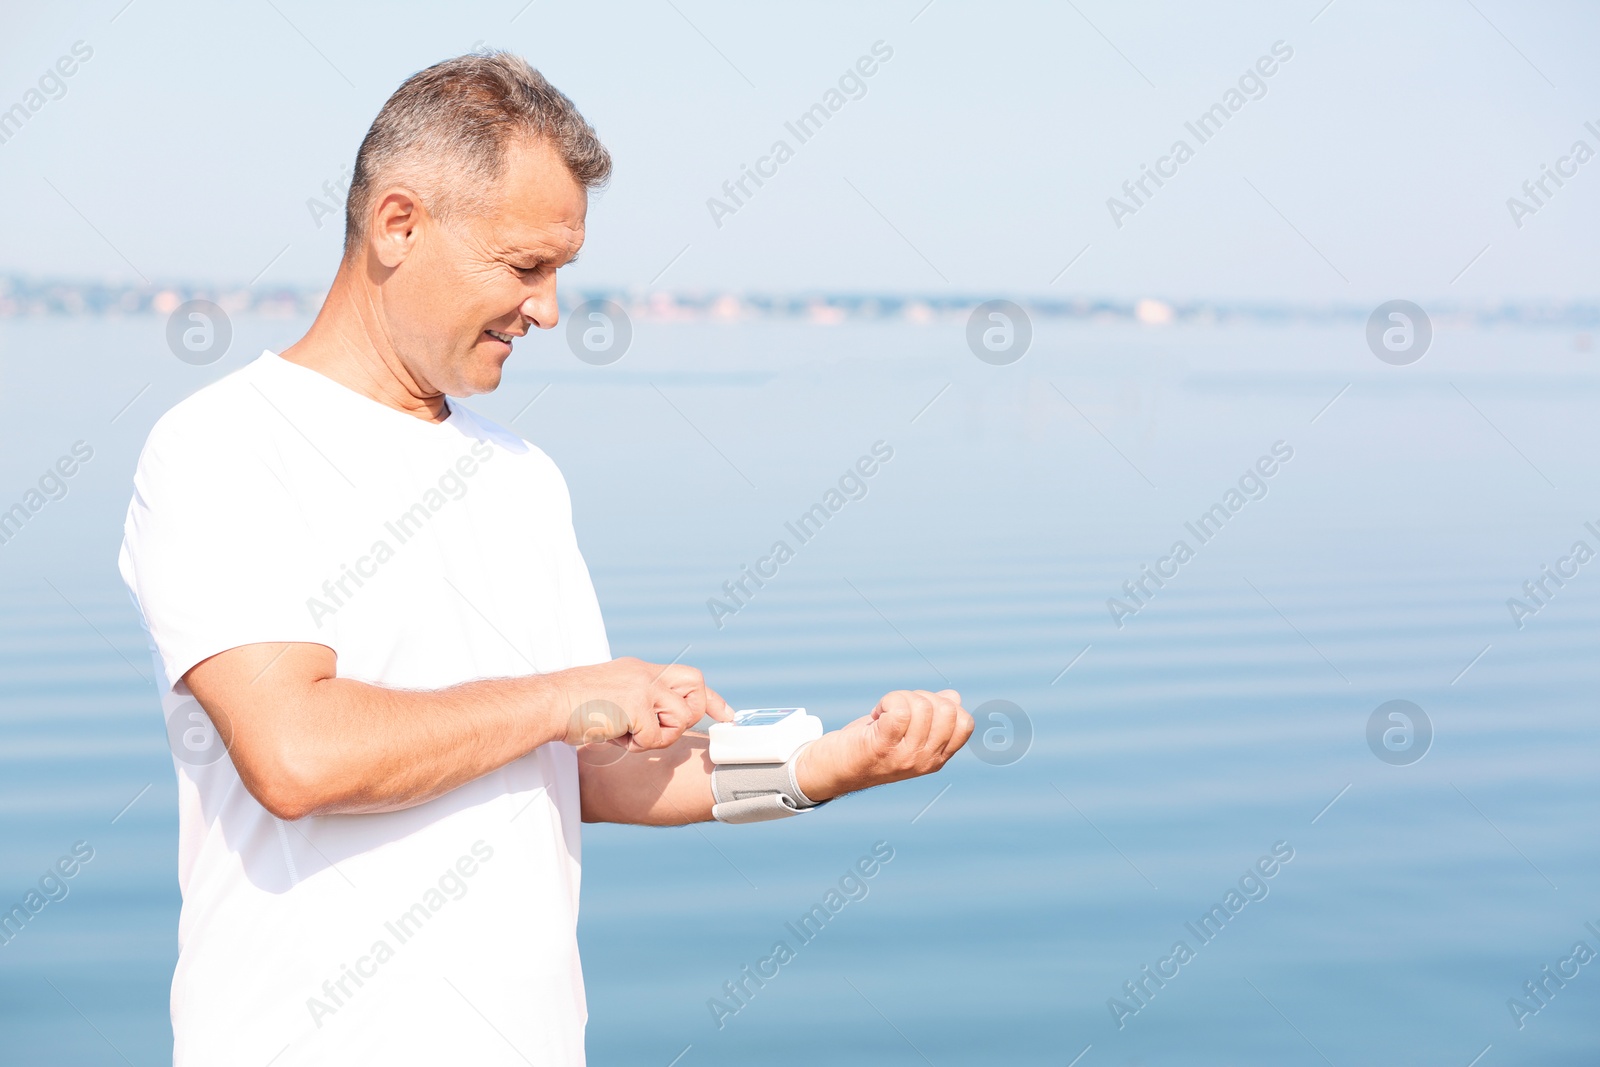 Photo of Man checking pulse outdoors on sunny day